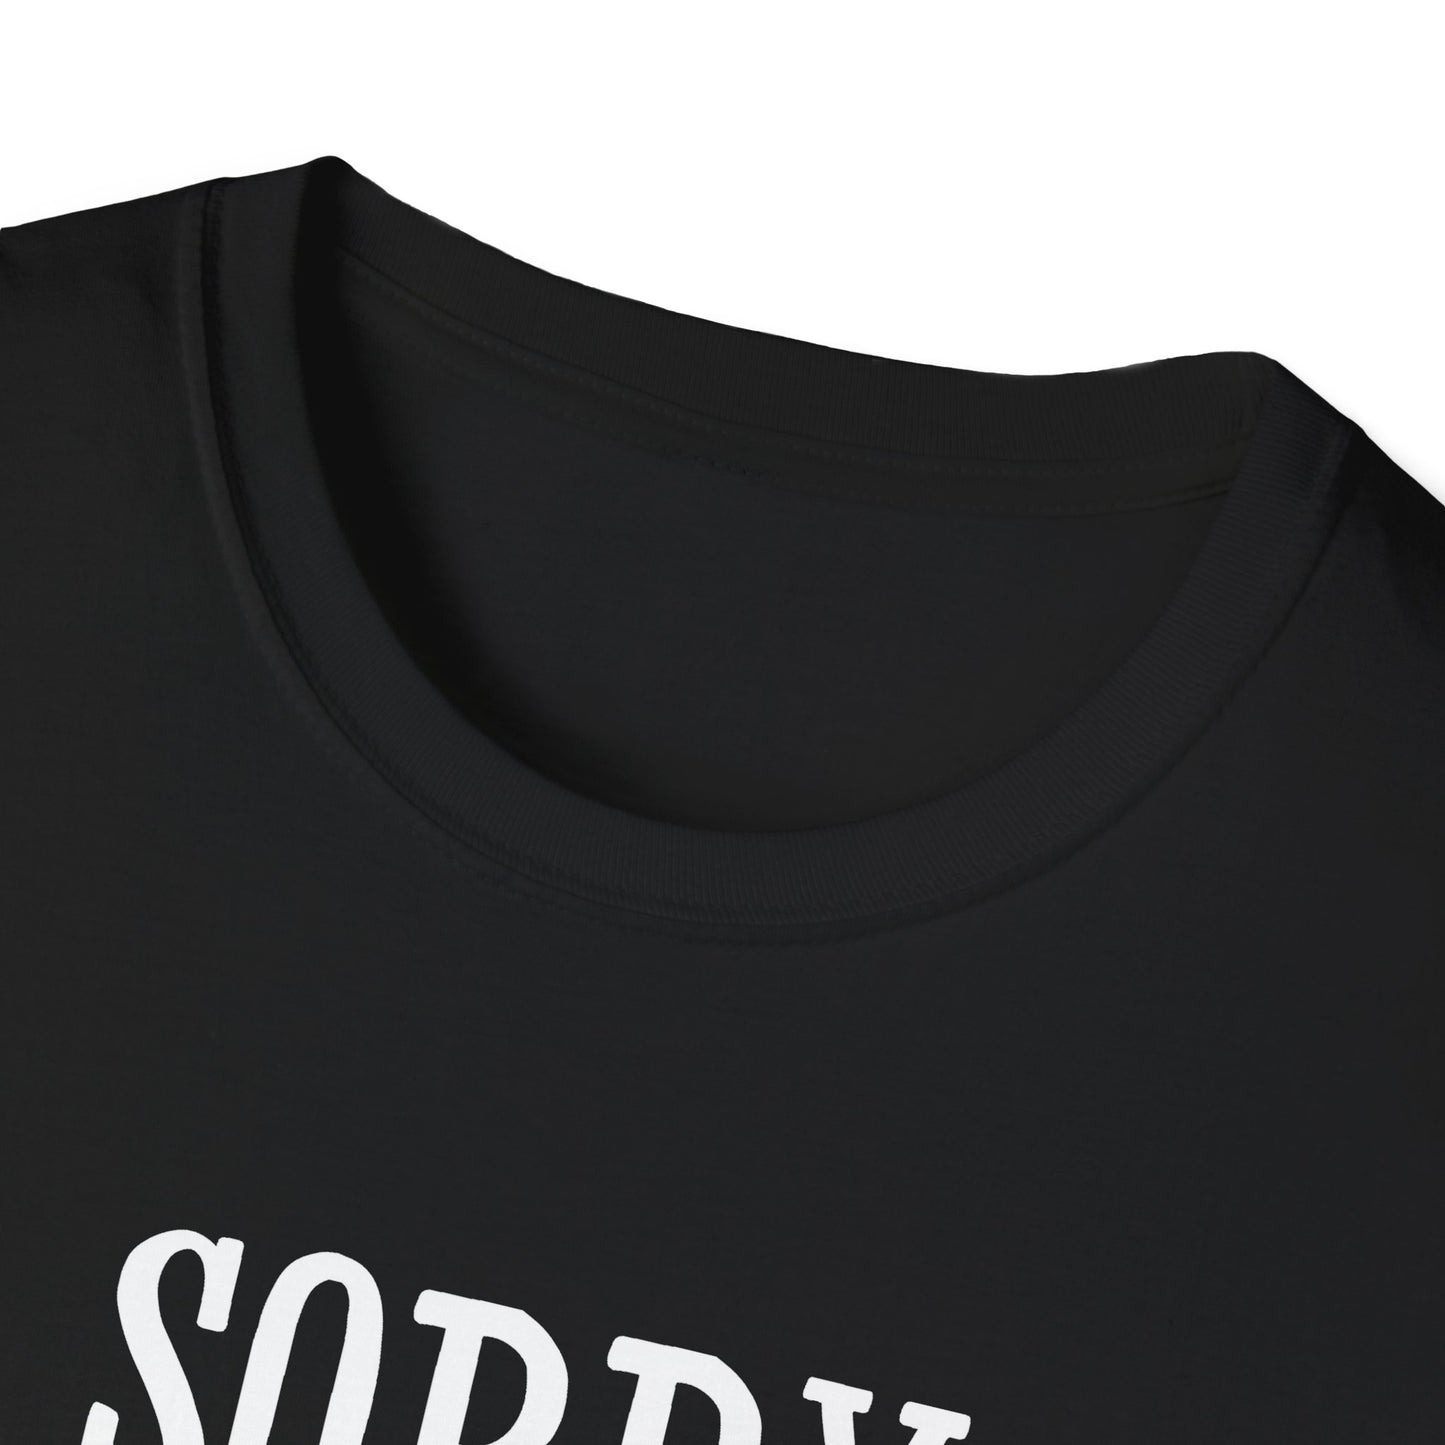 Sorry Only Talking To Jesus Unisex Softstyle T-Shirt